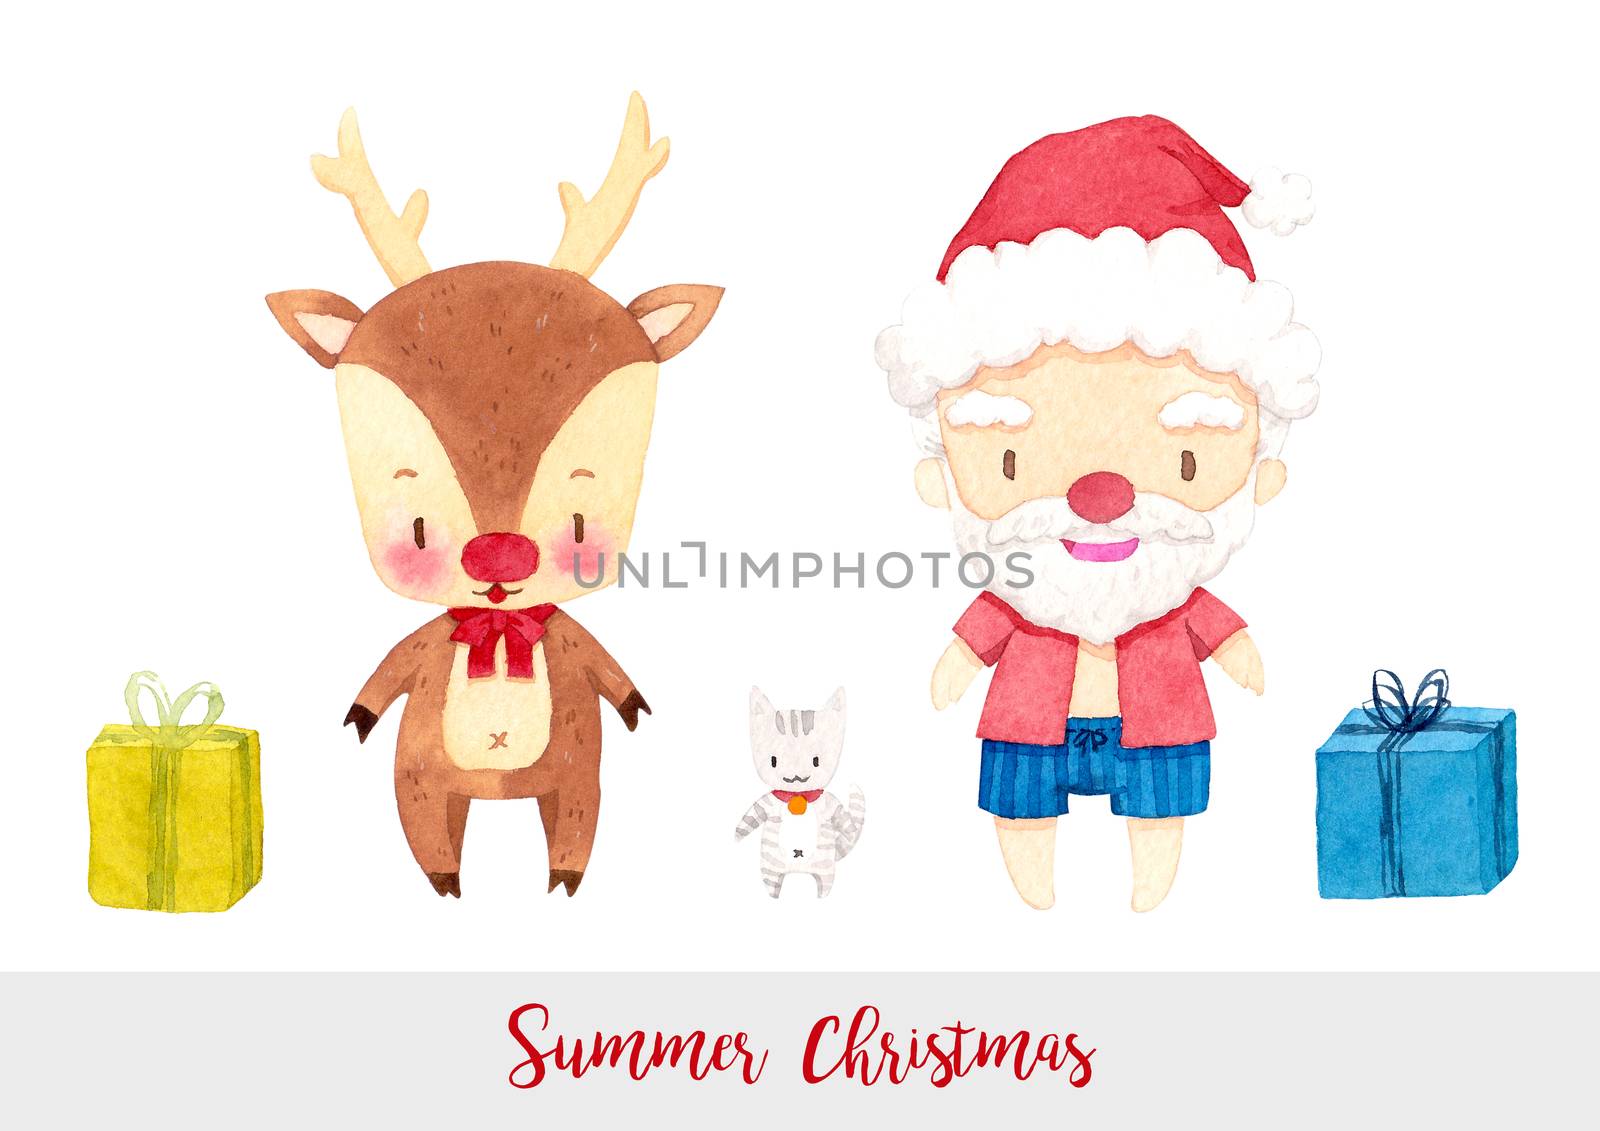 Cute Santa Claus, reindeer, cat and gift boxes. cartoon character watercolor hand painting for decoration in winter, Christmas, and new year festival advertising. isolated on white background. clipping path. by Ungamrung